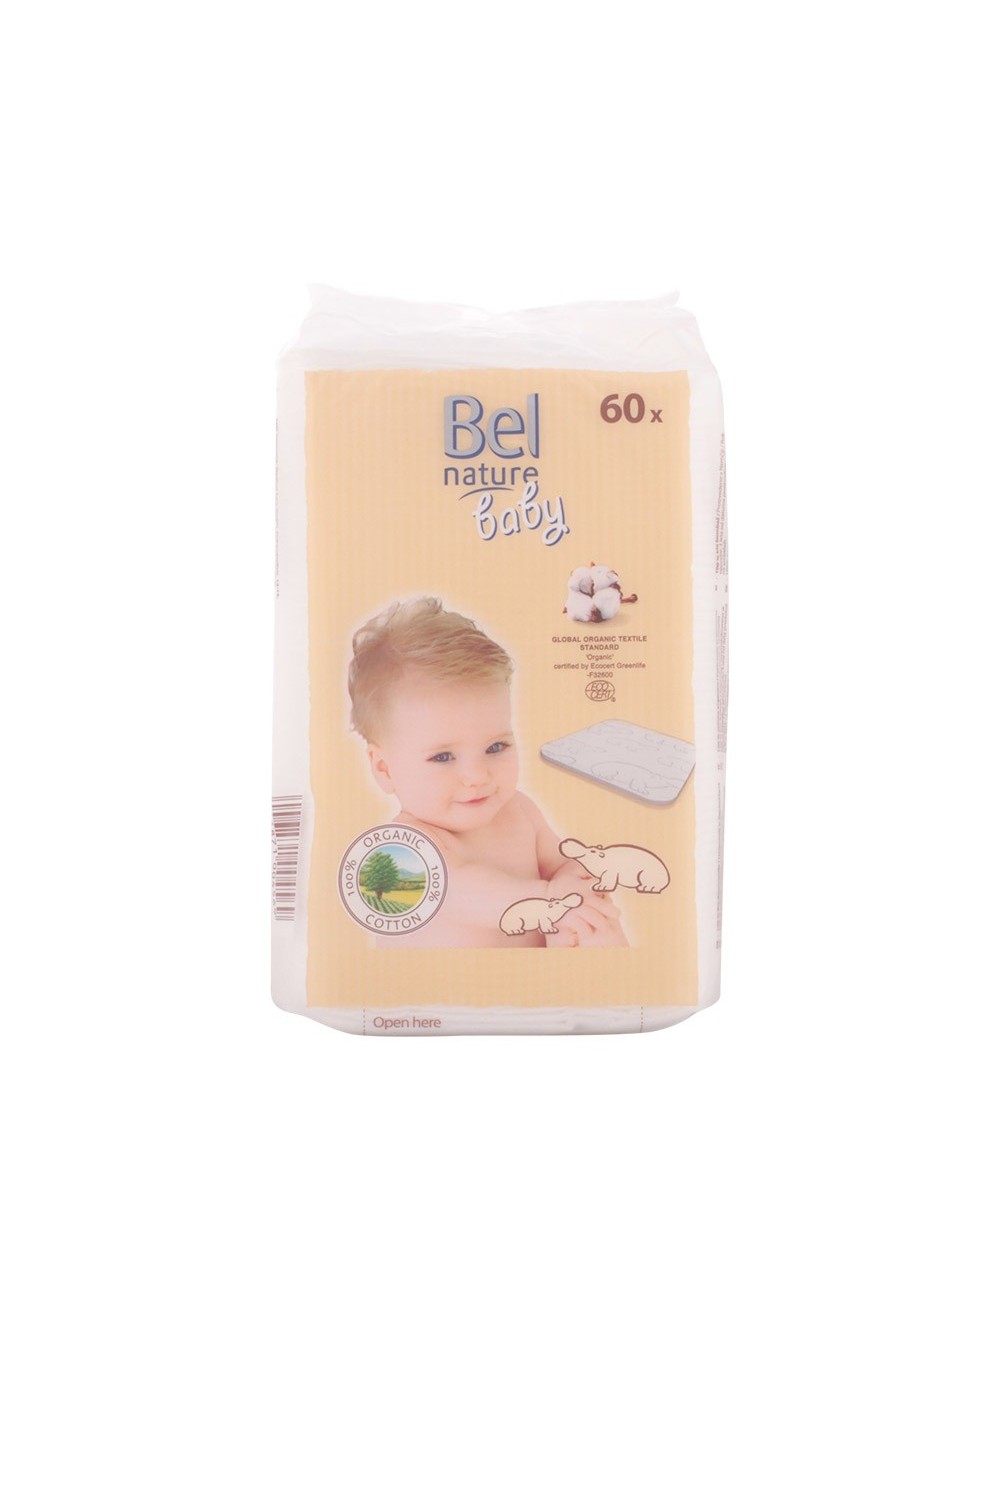 Bel Nature Baby Pads 60 Units